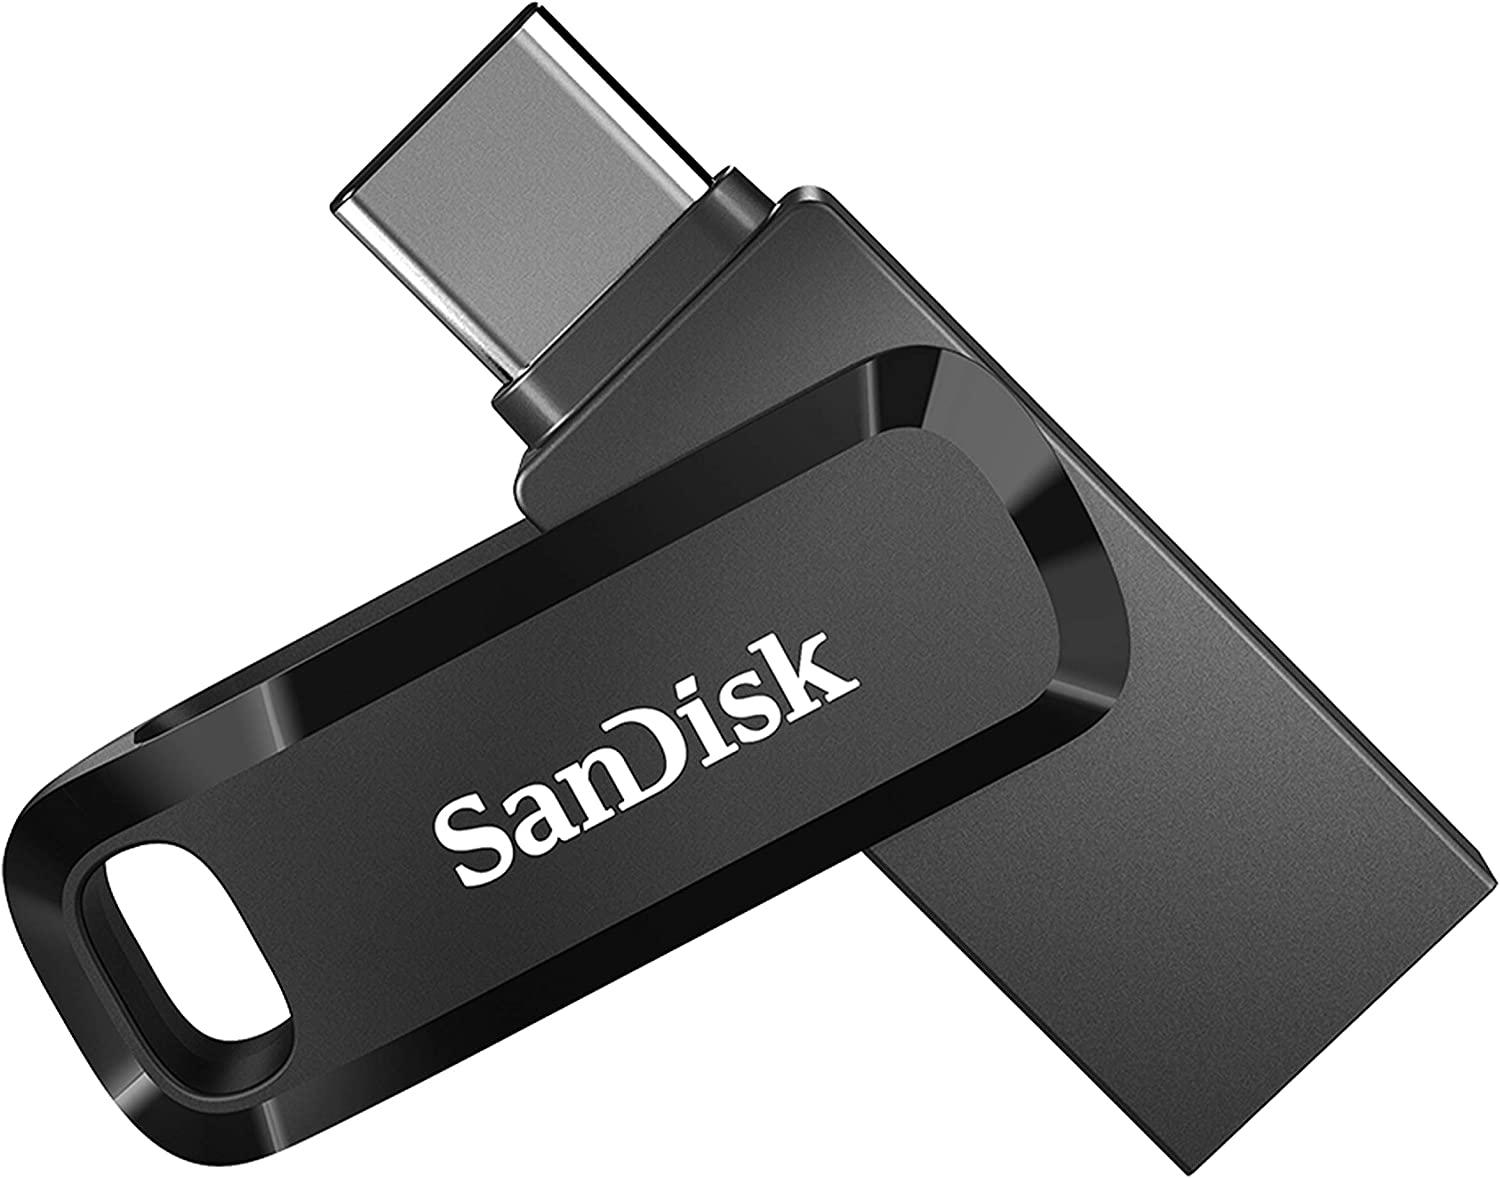 64GB SanDisk Ultra Go Dual Drive USB Type-C Flash Drive for $8.99